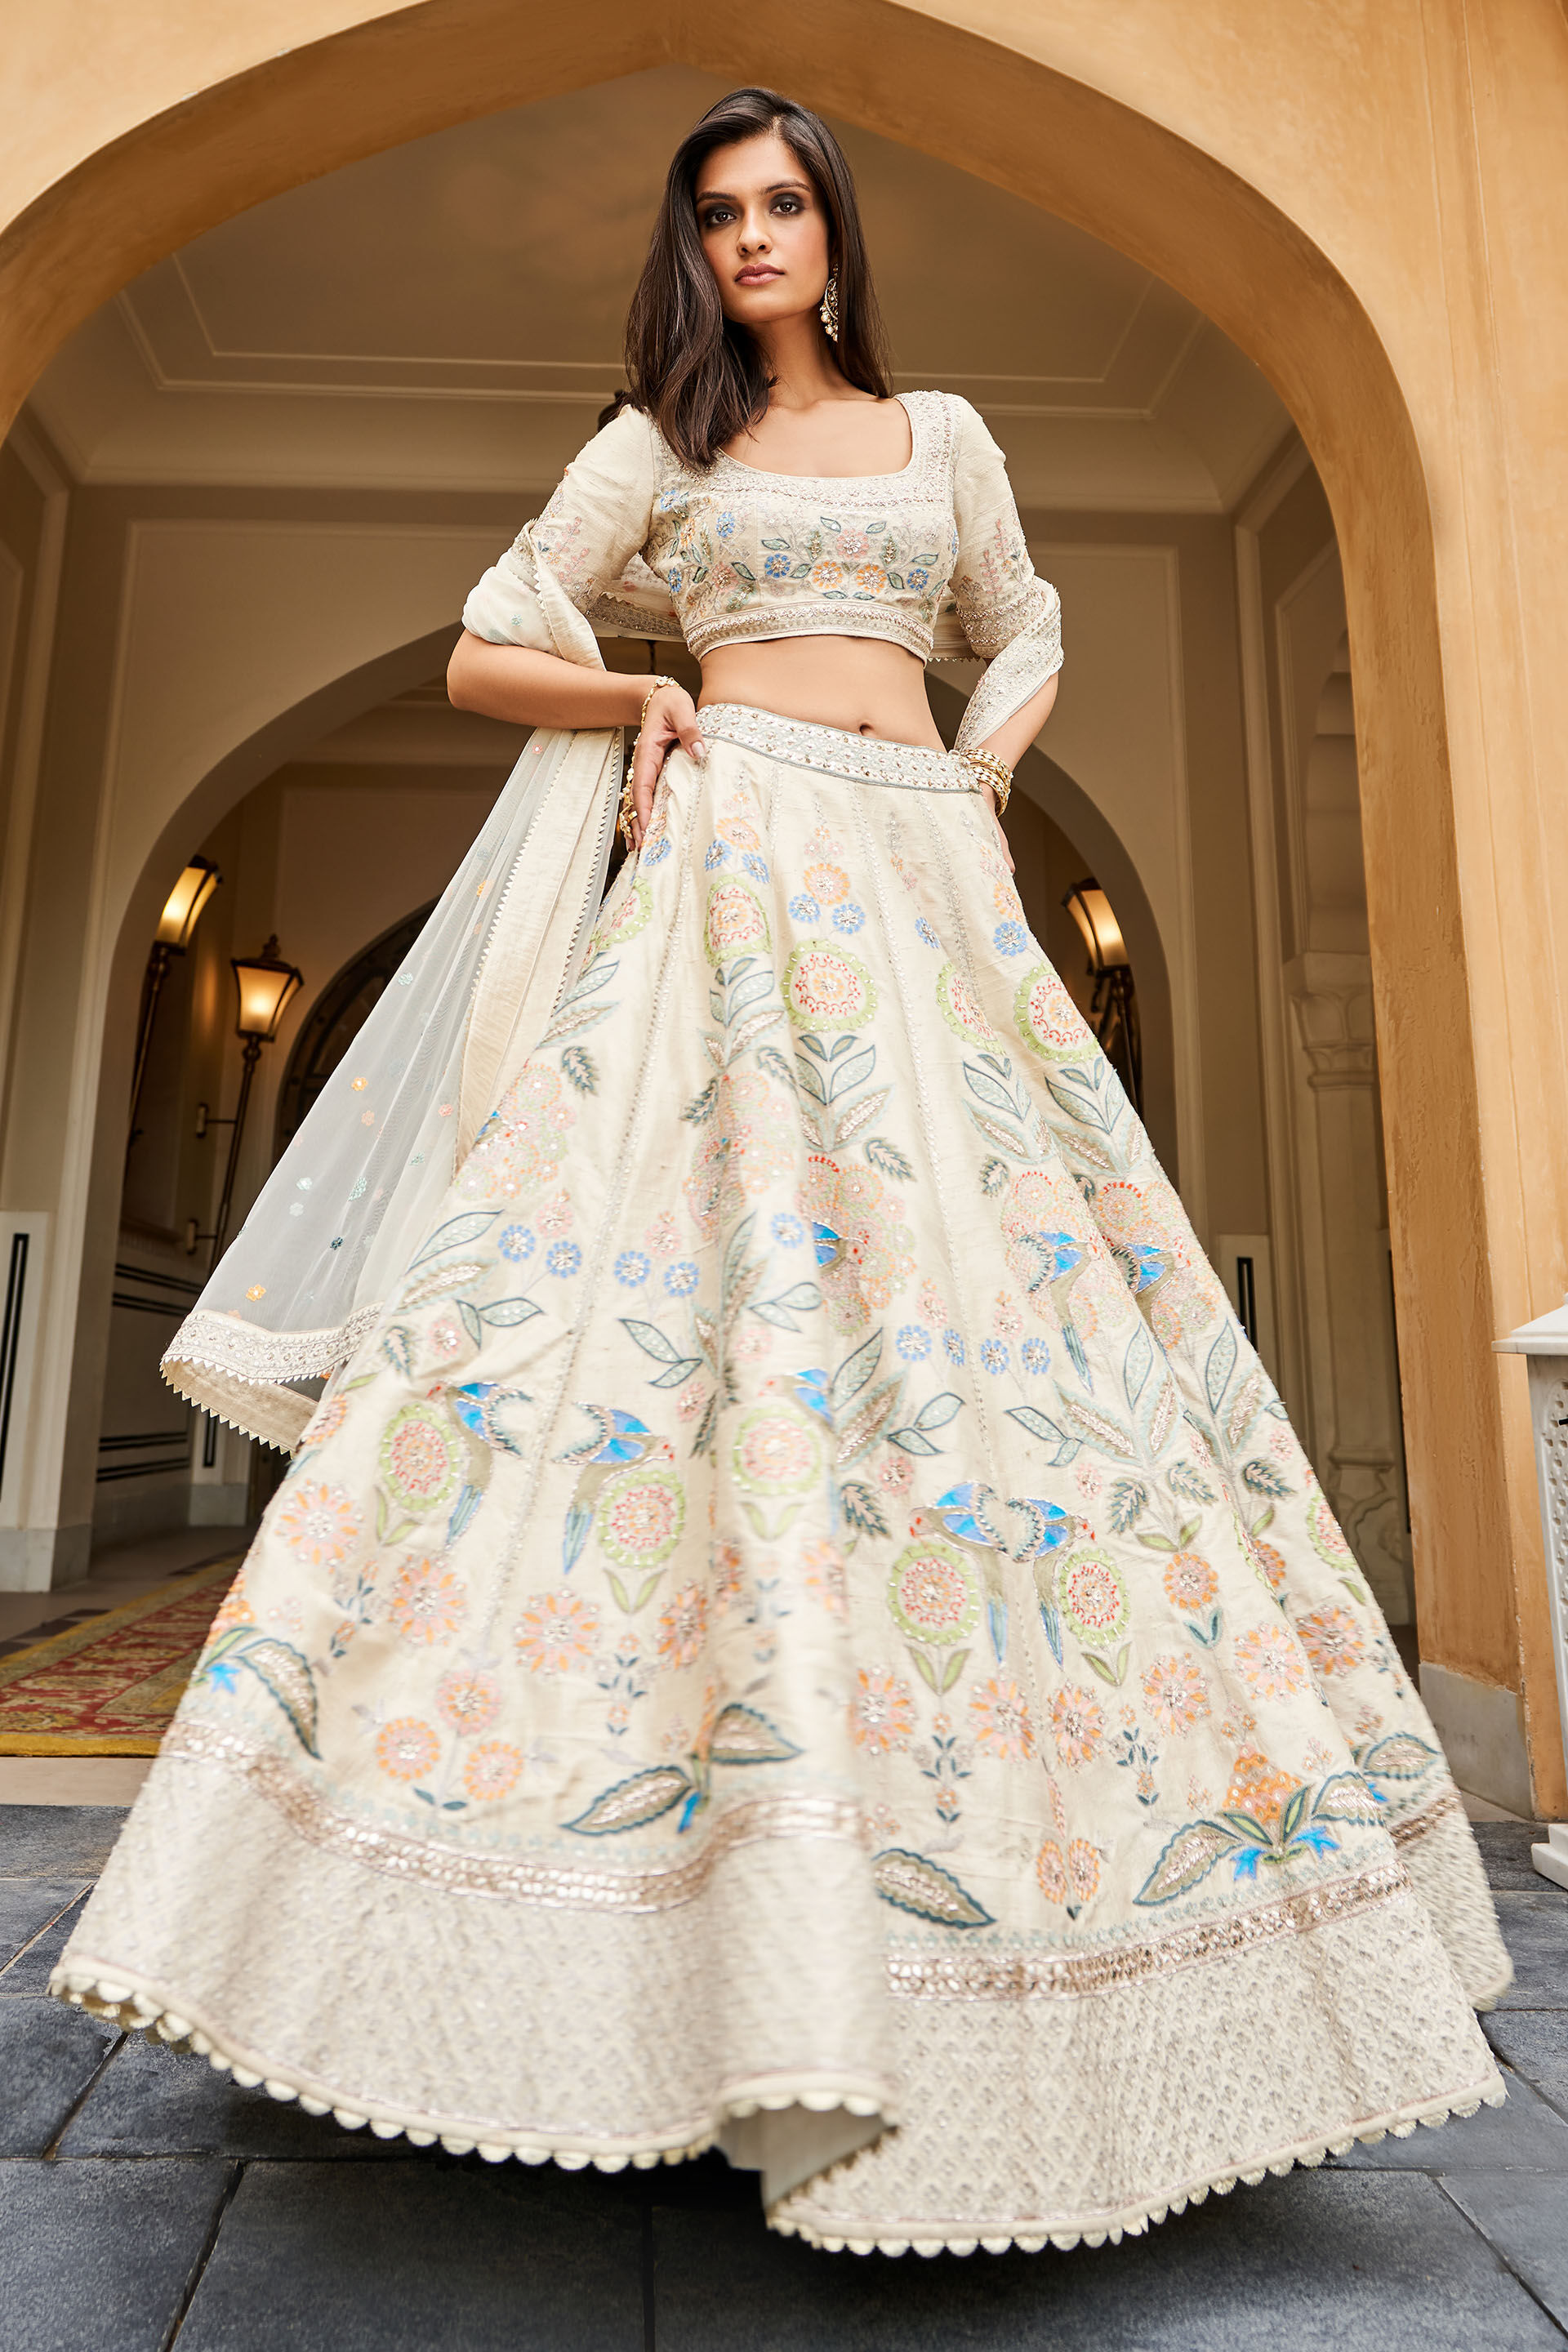 50+ Lehenga Blouse Designs To Browse & Take Inspiration From! | WedMeGood